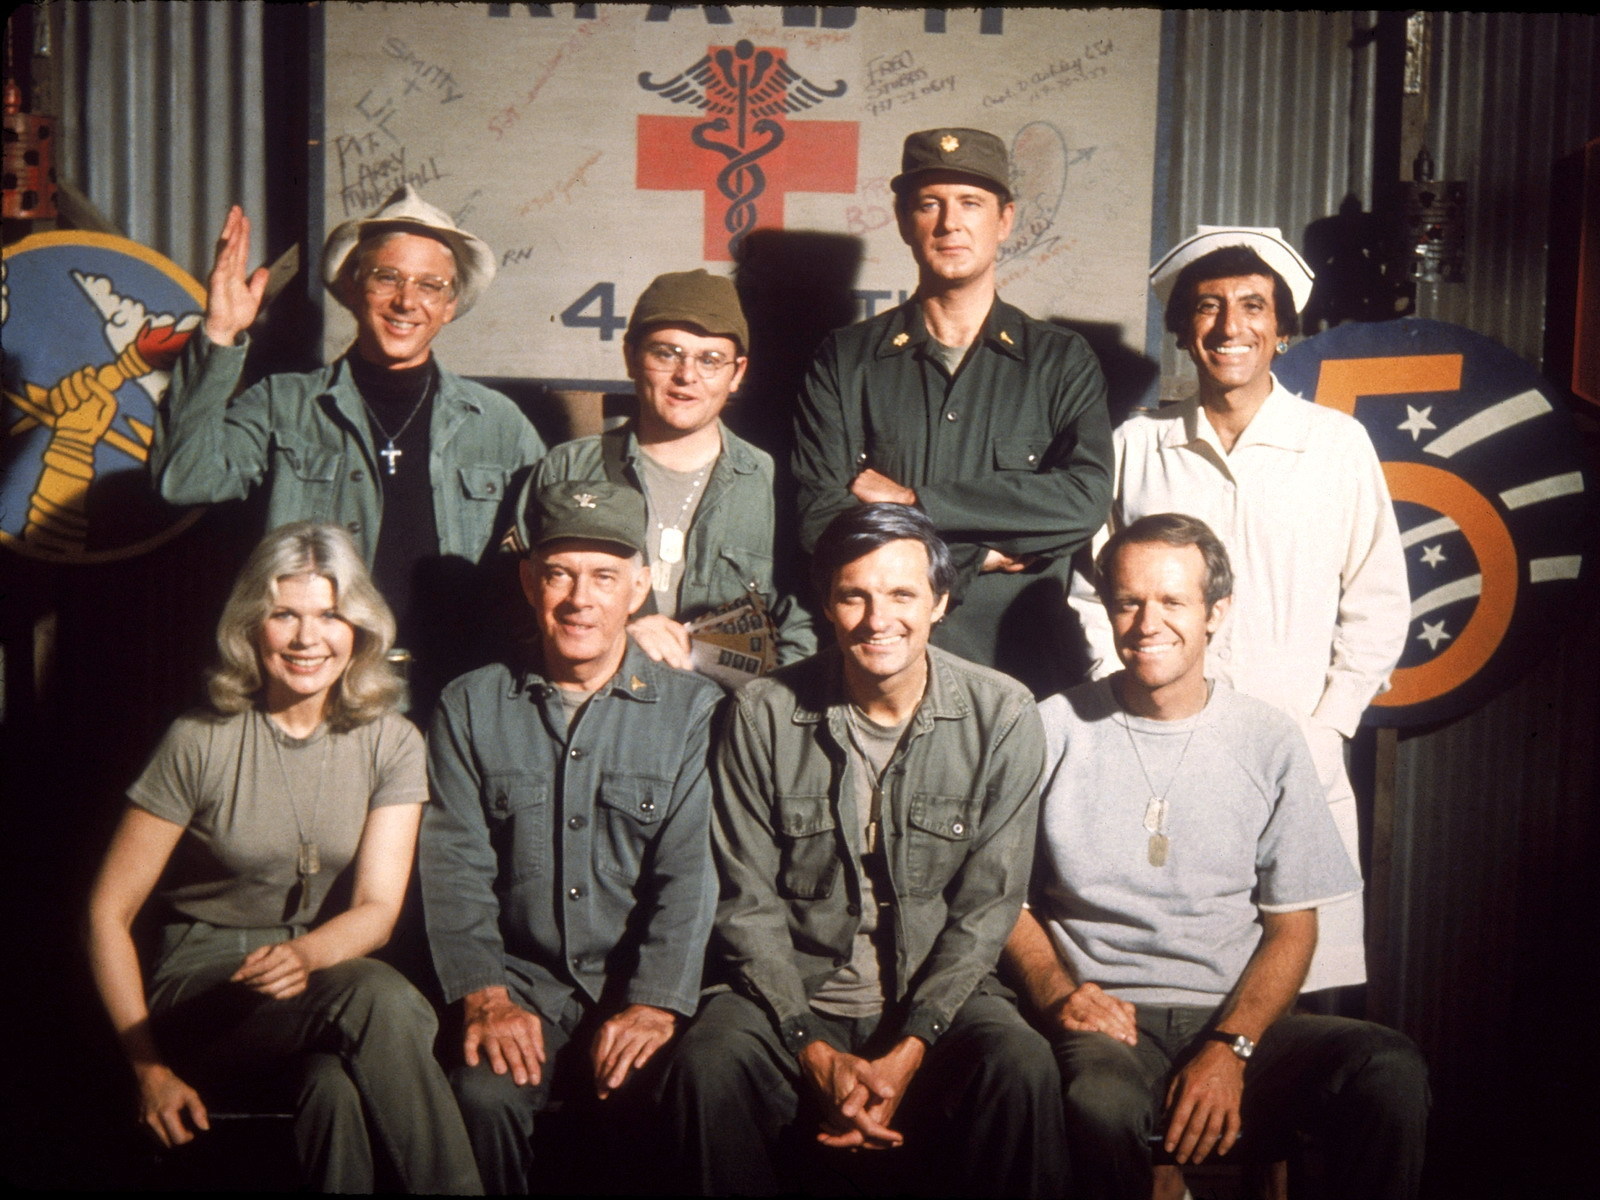 5 reasons why you should watch ‘m*a*s*h’ on netflix